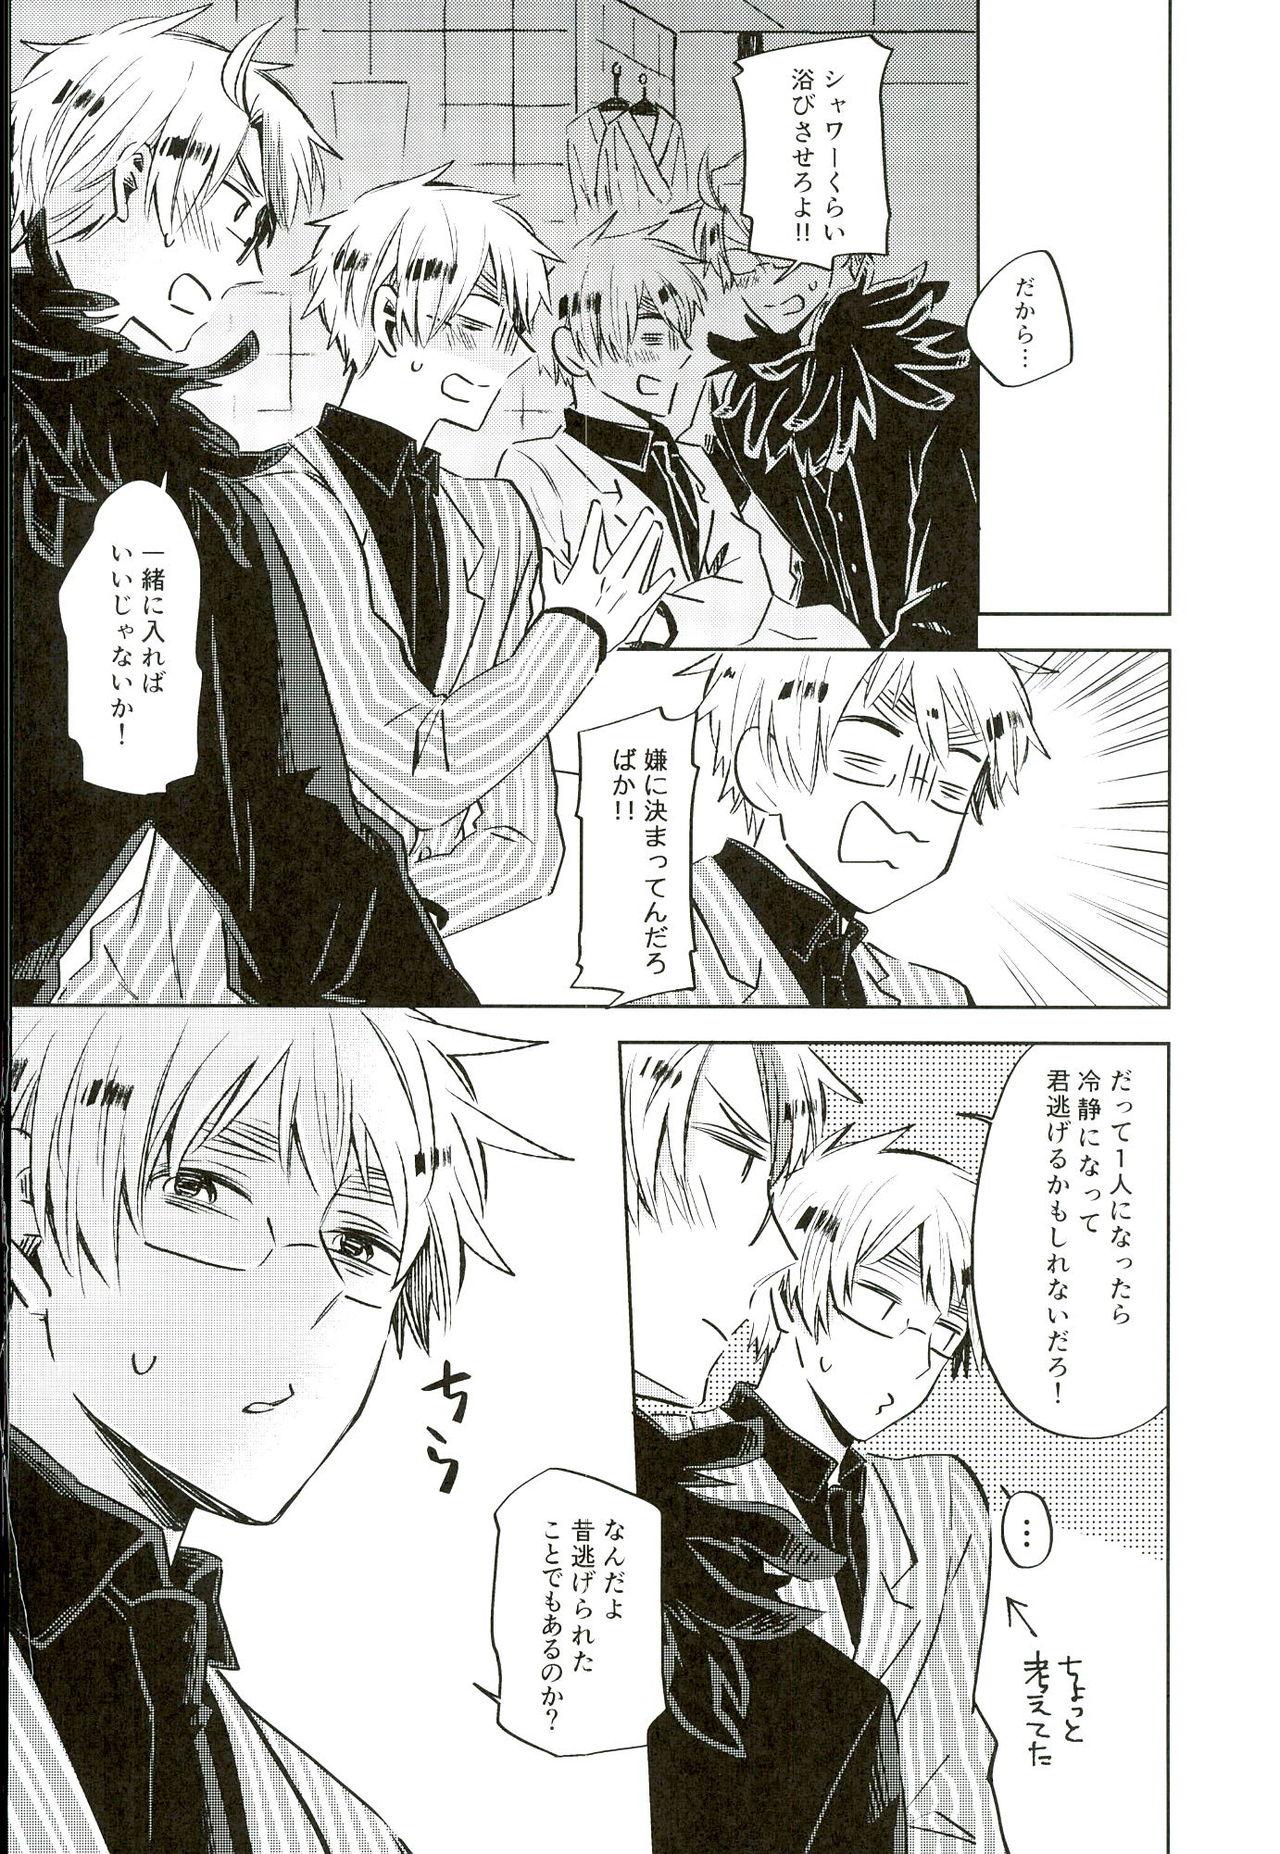 Black Ameagari no Slip Out - Axis powers hetalia Pussylicking - Page 7